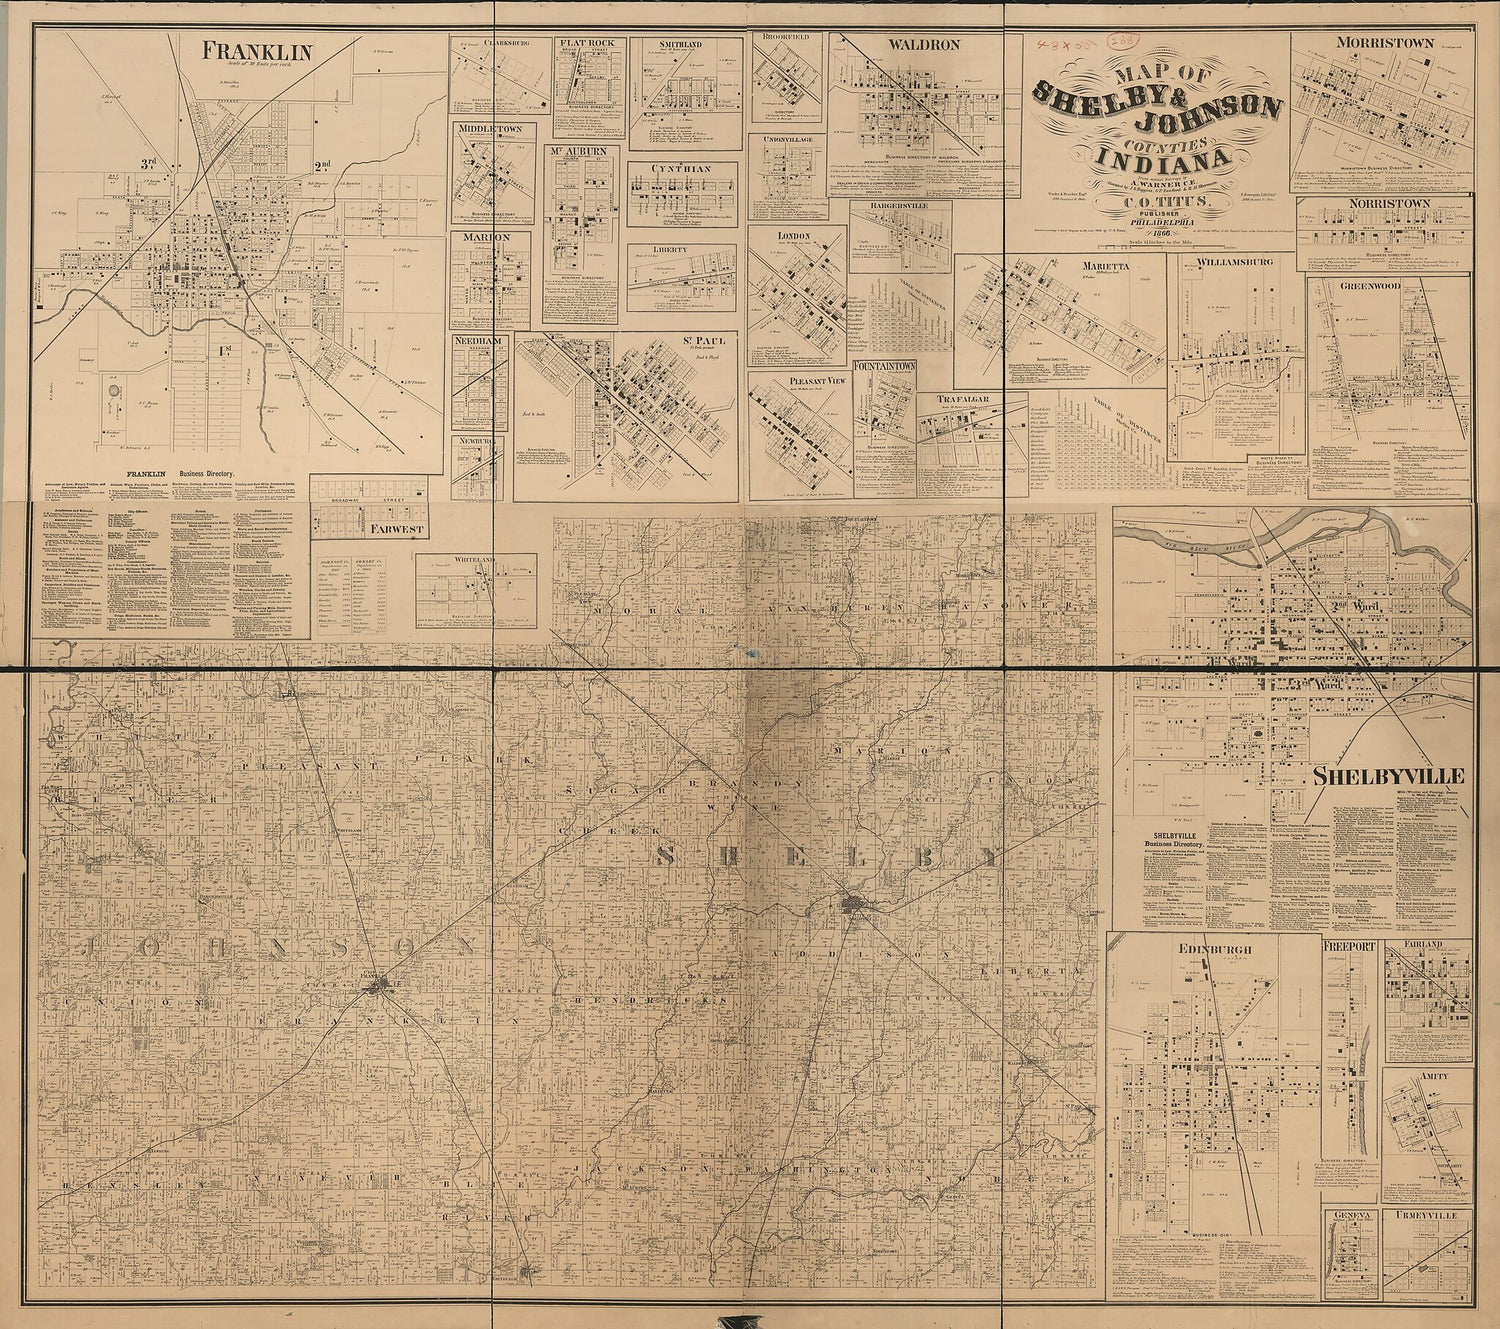 This old map of Map of Shelby &amp; Johnson Counties, Indiana from 1866 was created by F. (Frederick) Bourquin, A. Warner in 1866